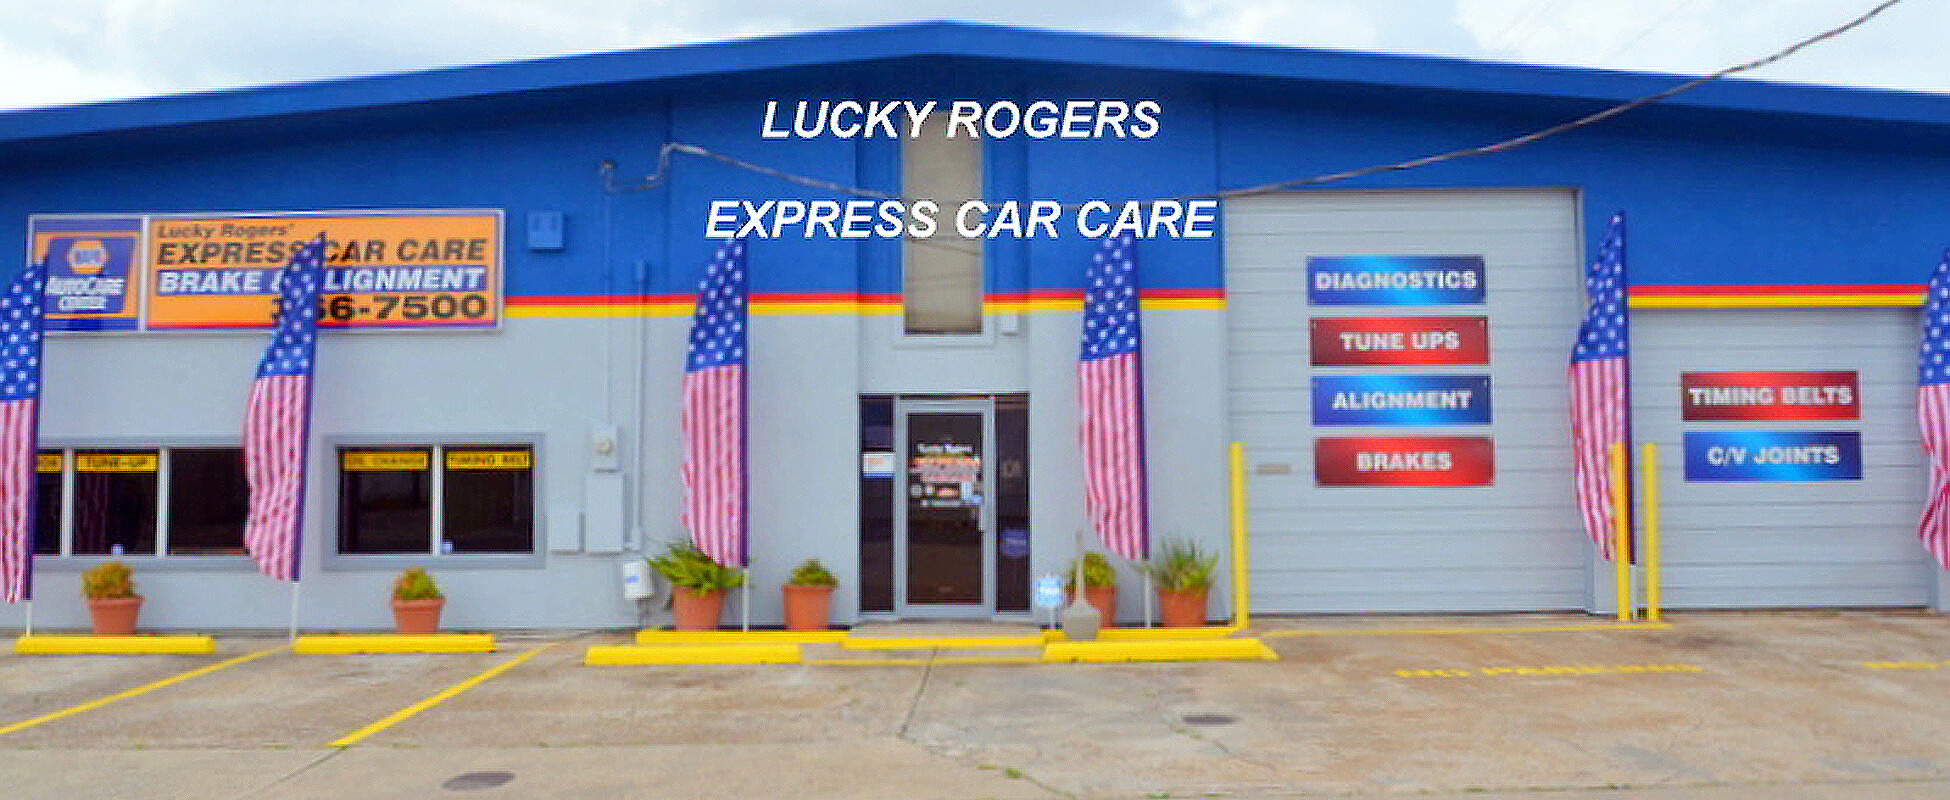 Welcome to Lucky Rogers Express Car Care